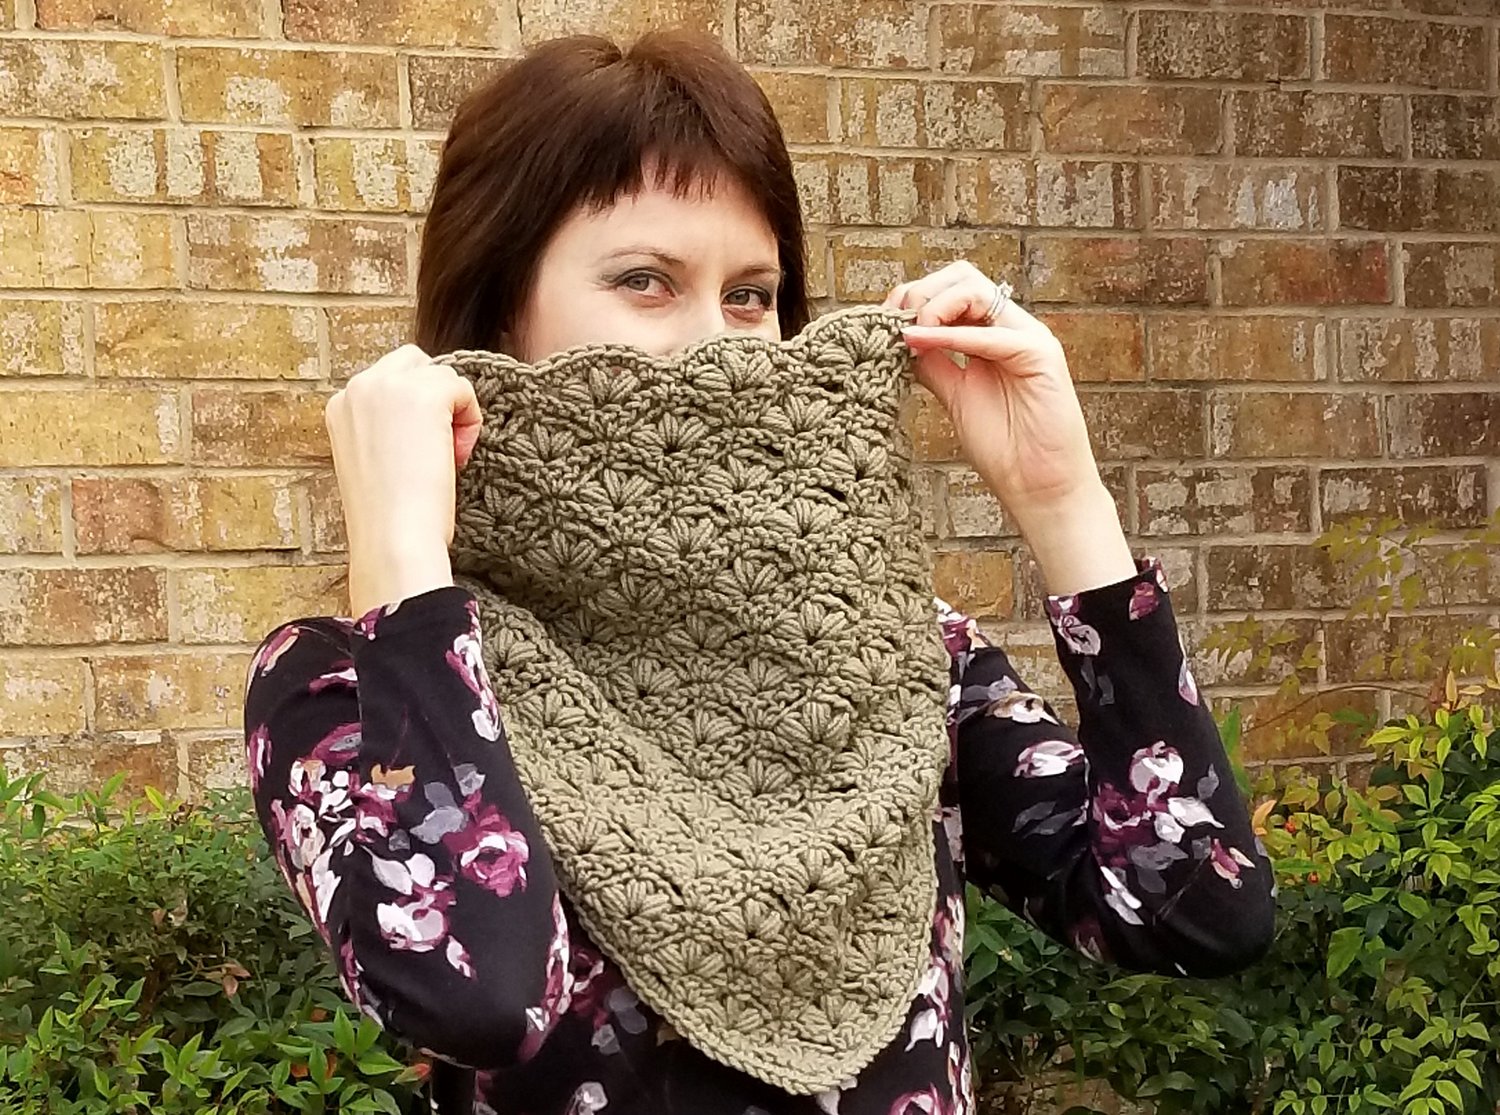 Latte Hooded Infinity Scarf - Payhip